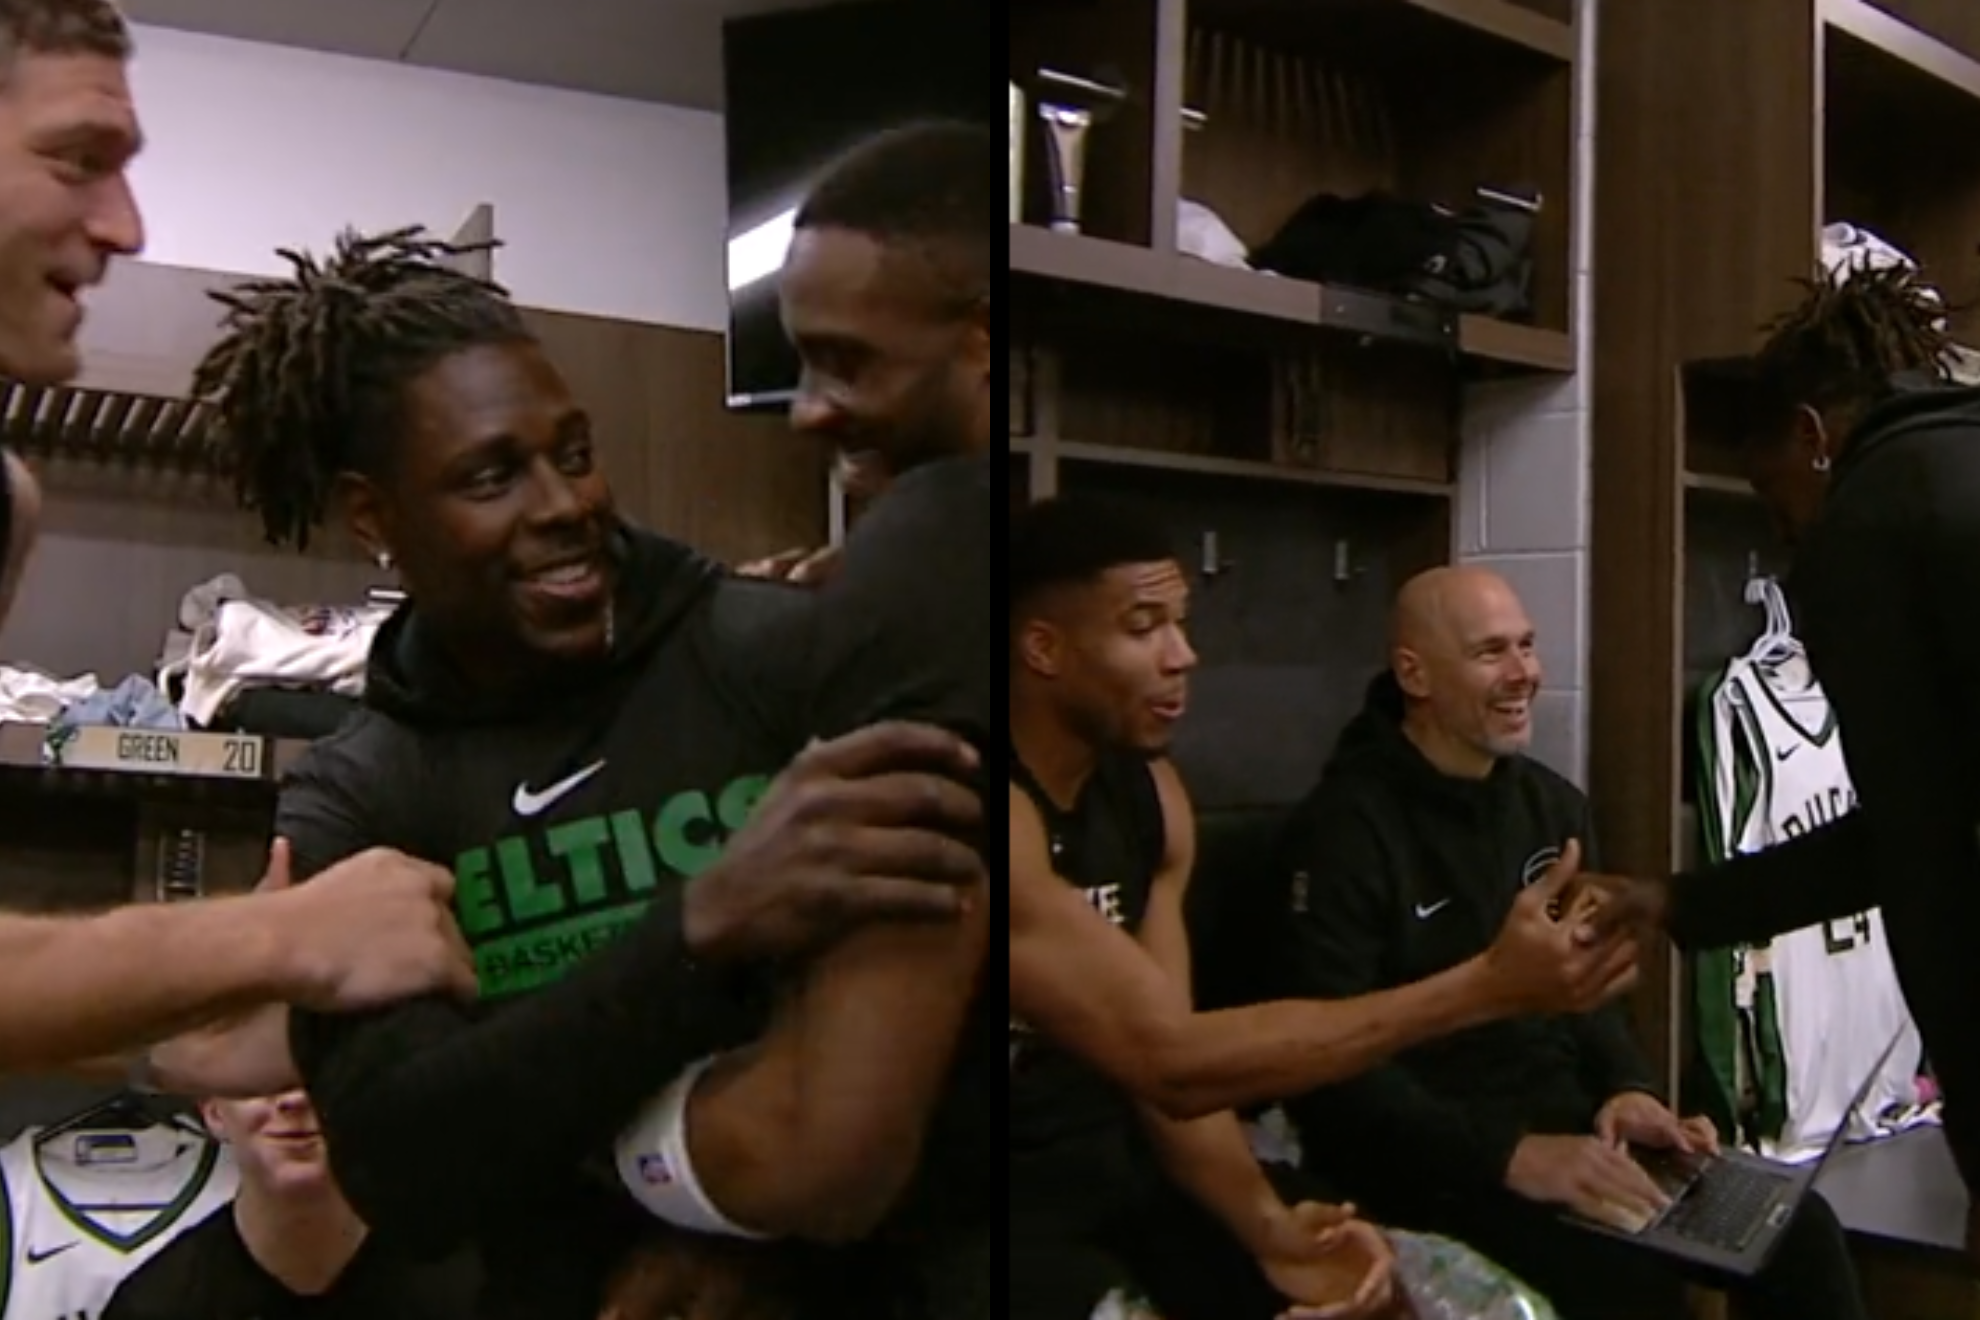 Jrue Holiday (in "Celtics" sweater) greets his former Milwaukee teammates, including Giannis Antetokounmpo.